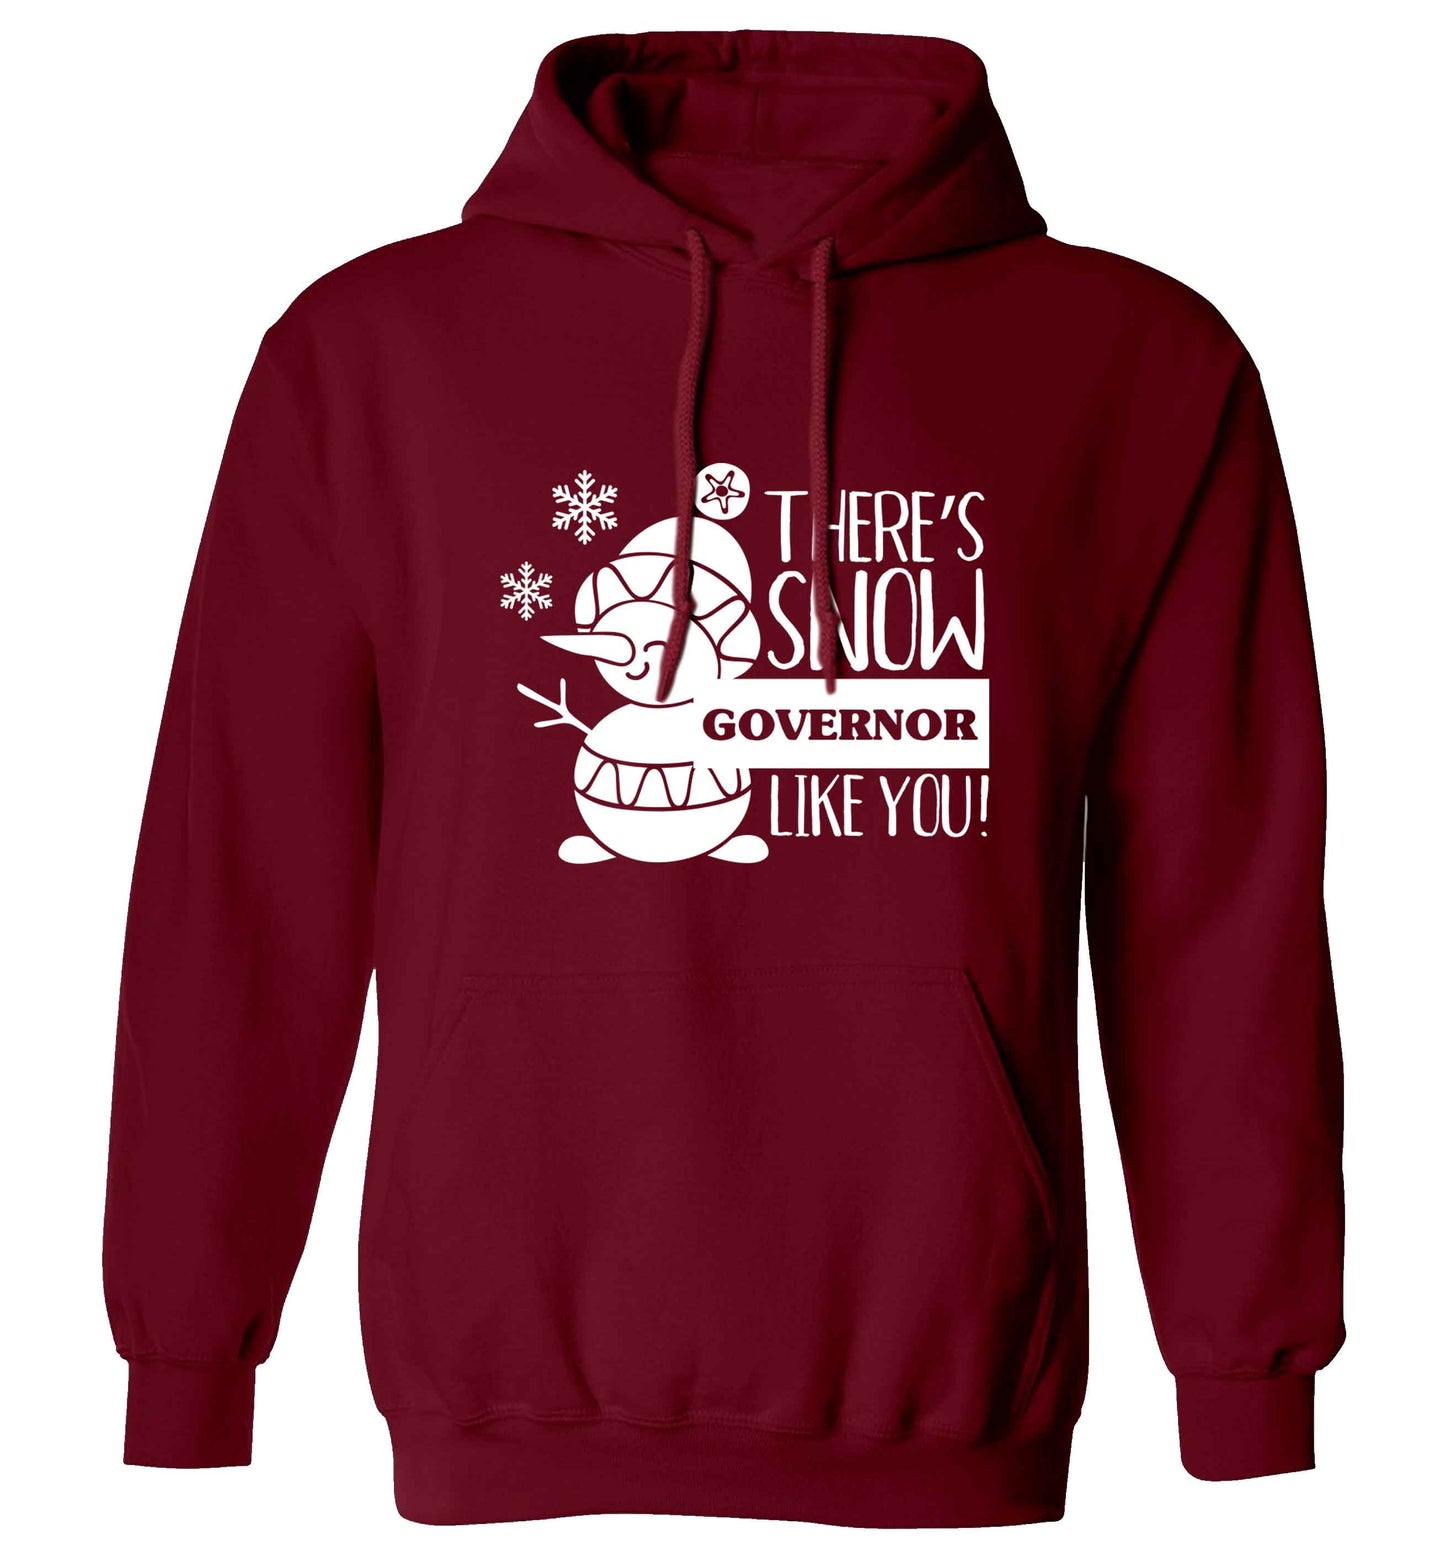 There's snow governor like you adults unisex maroon hoodie 2XL